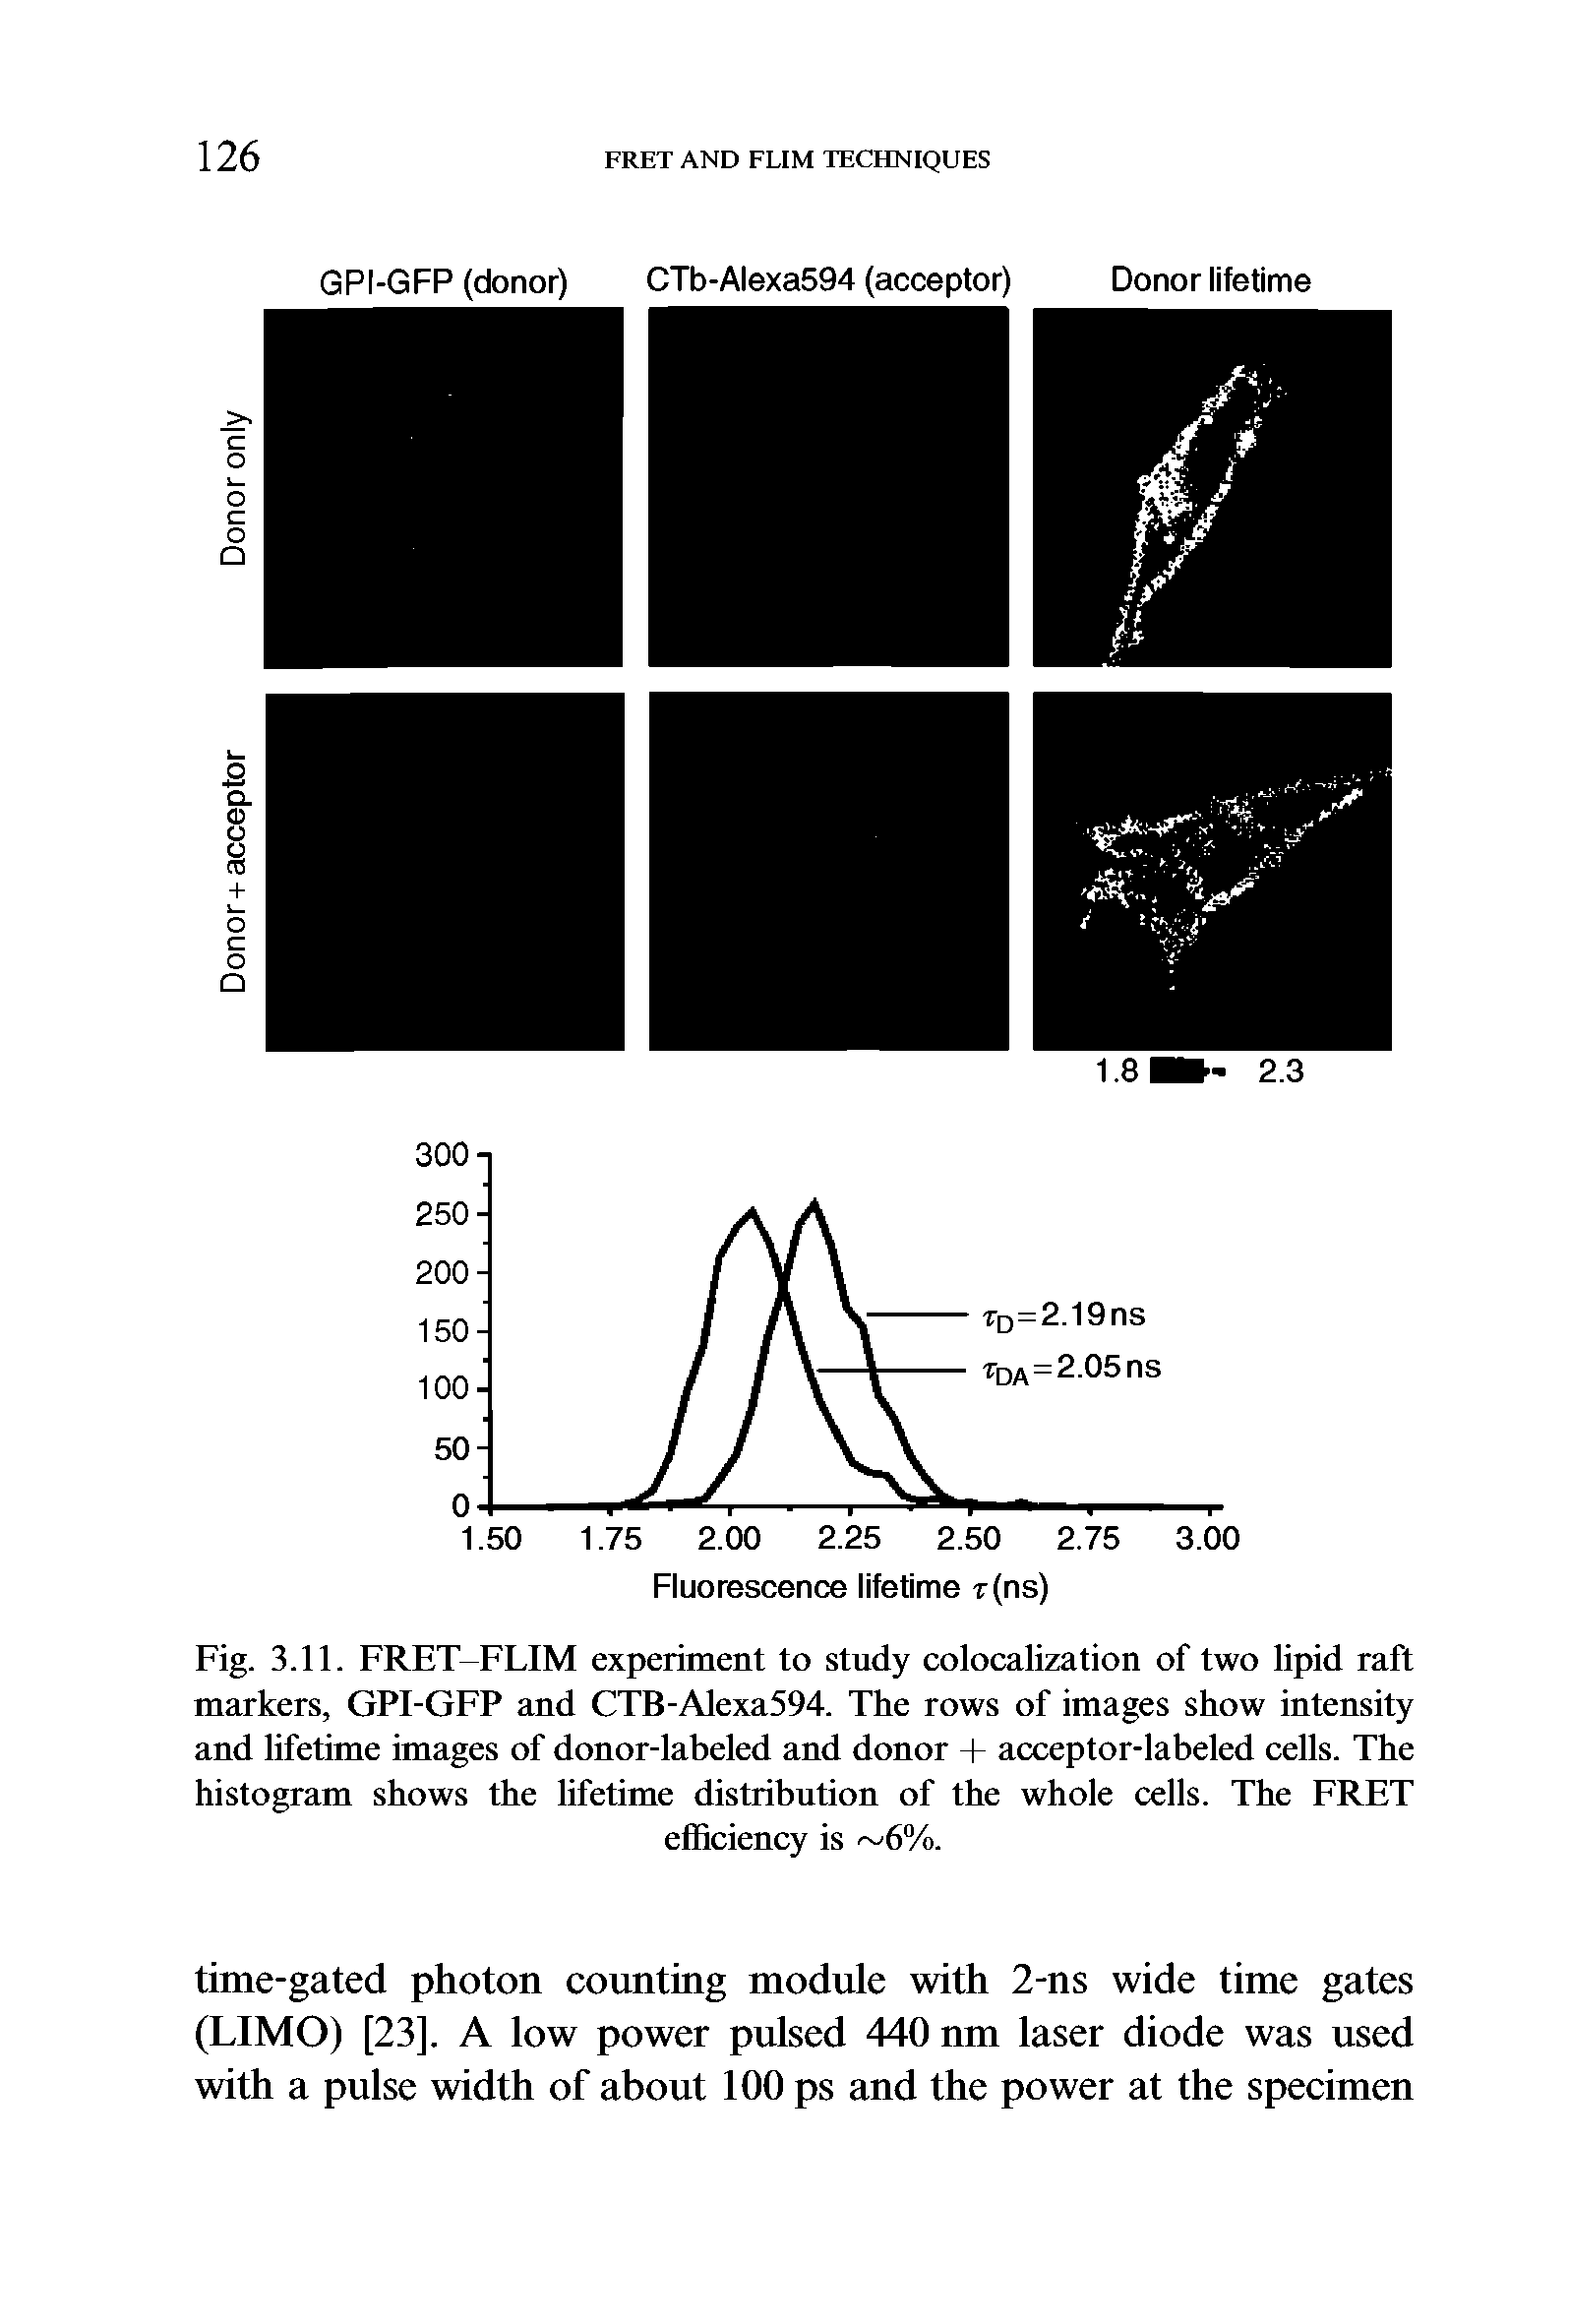 Fig. 3.11. FRET FLIM experiment to study colocalization of two lipid raft markers, GPI-GFP and CTB-Alexa594. The rows of images show intensity and lifetime images of donor-labeled and donor + acceptor-labeled cells. The histogram shows the lifetime distribution of the whole cells. The FRET...